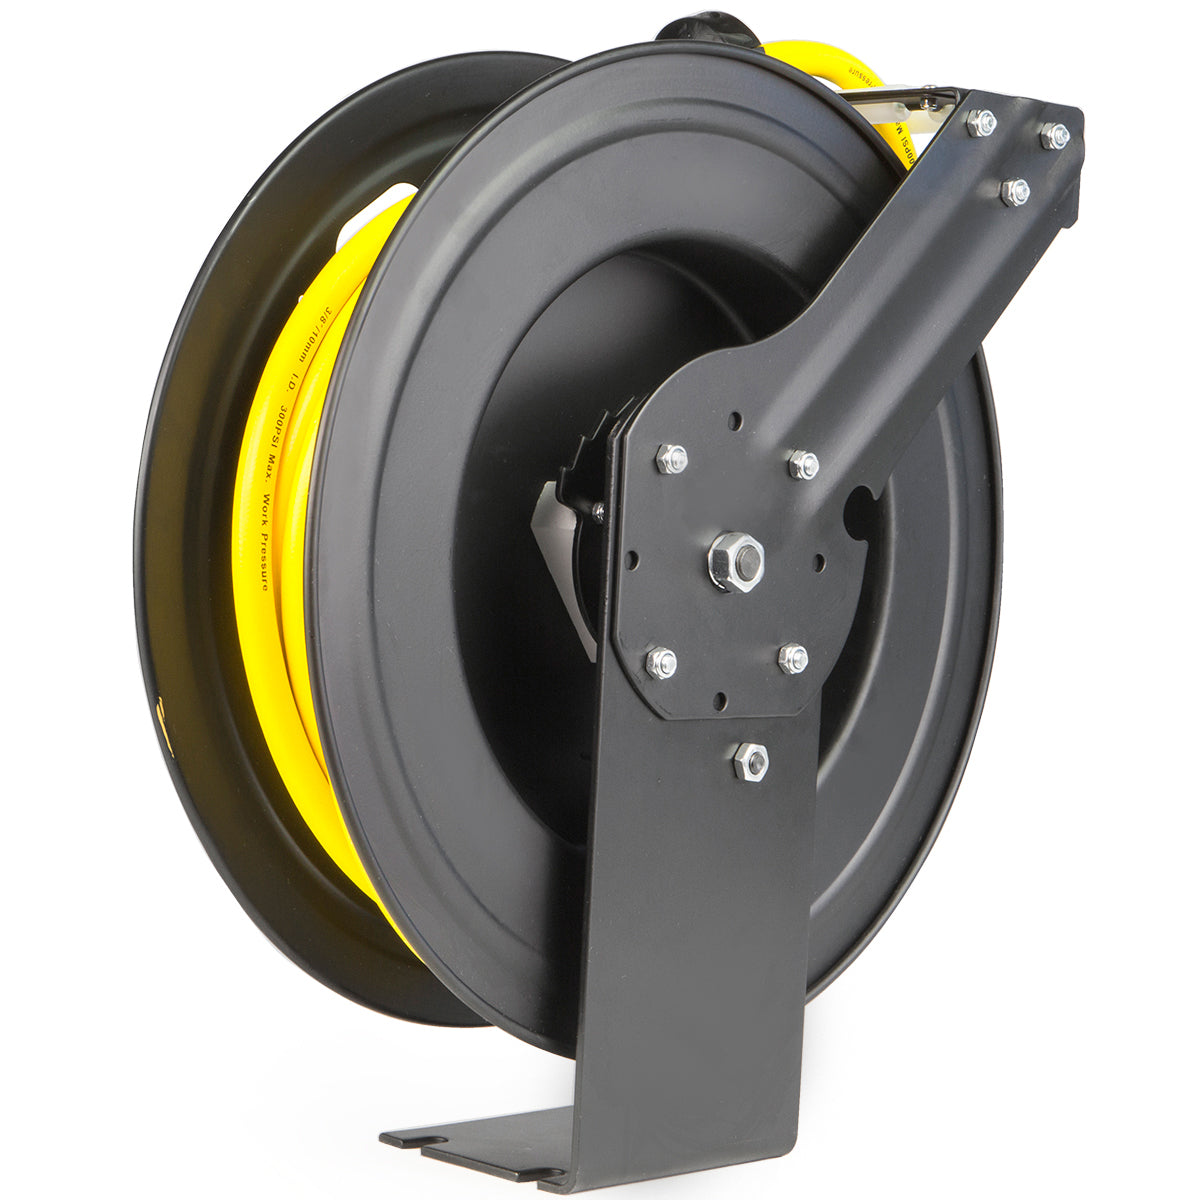 JEGS Performance Products 81056 Retractable Air Hose Reel Max Pressure: 300 PSI